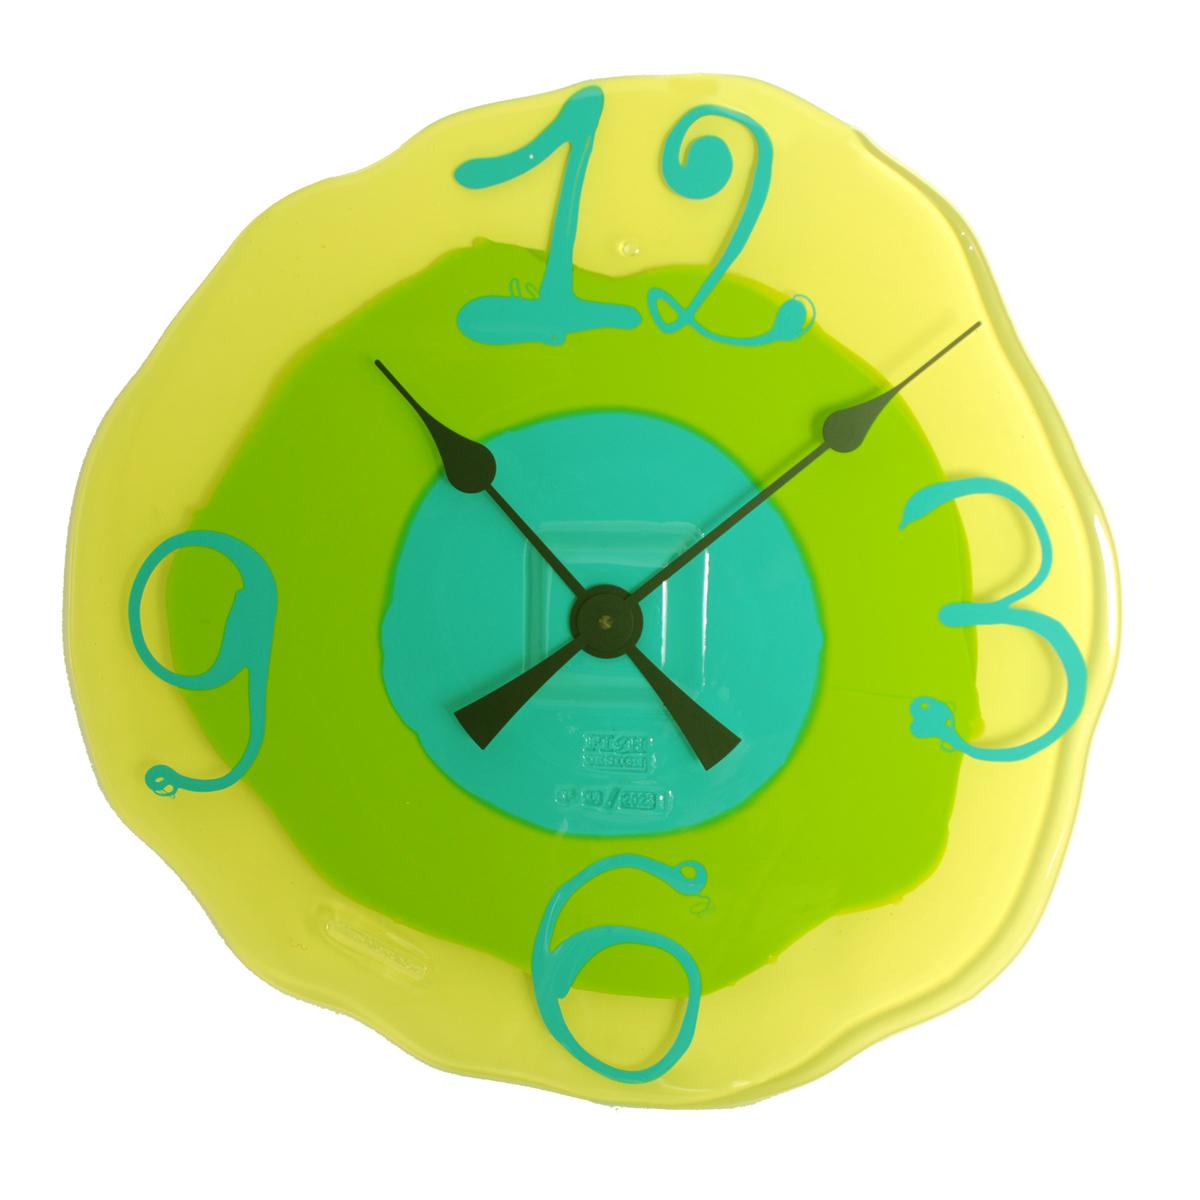 Watch me clock - clear yellow, matt lime, matt turquoise.
Clock in hard resin designed by Gaetano Pesce for Fish Design collection.

Additional information: 
Material: Hard resin
Color: clear yellow, matt lime, matt turquoise.
Dimensions: L - ø